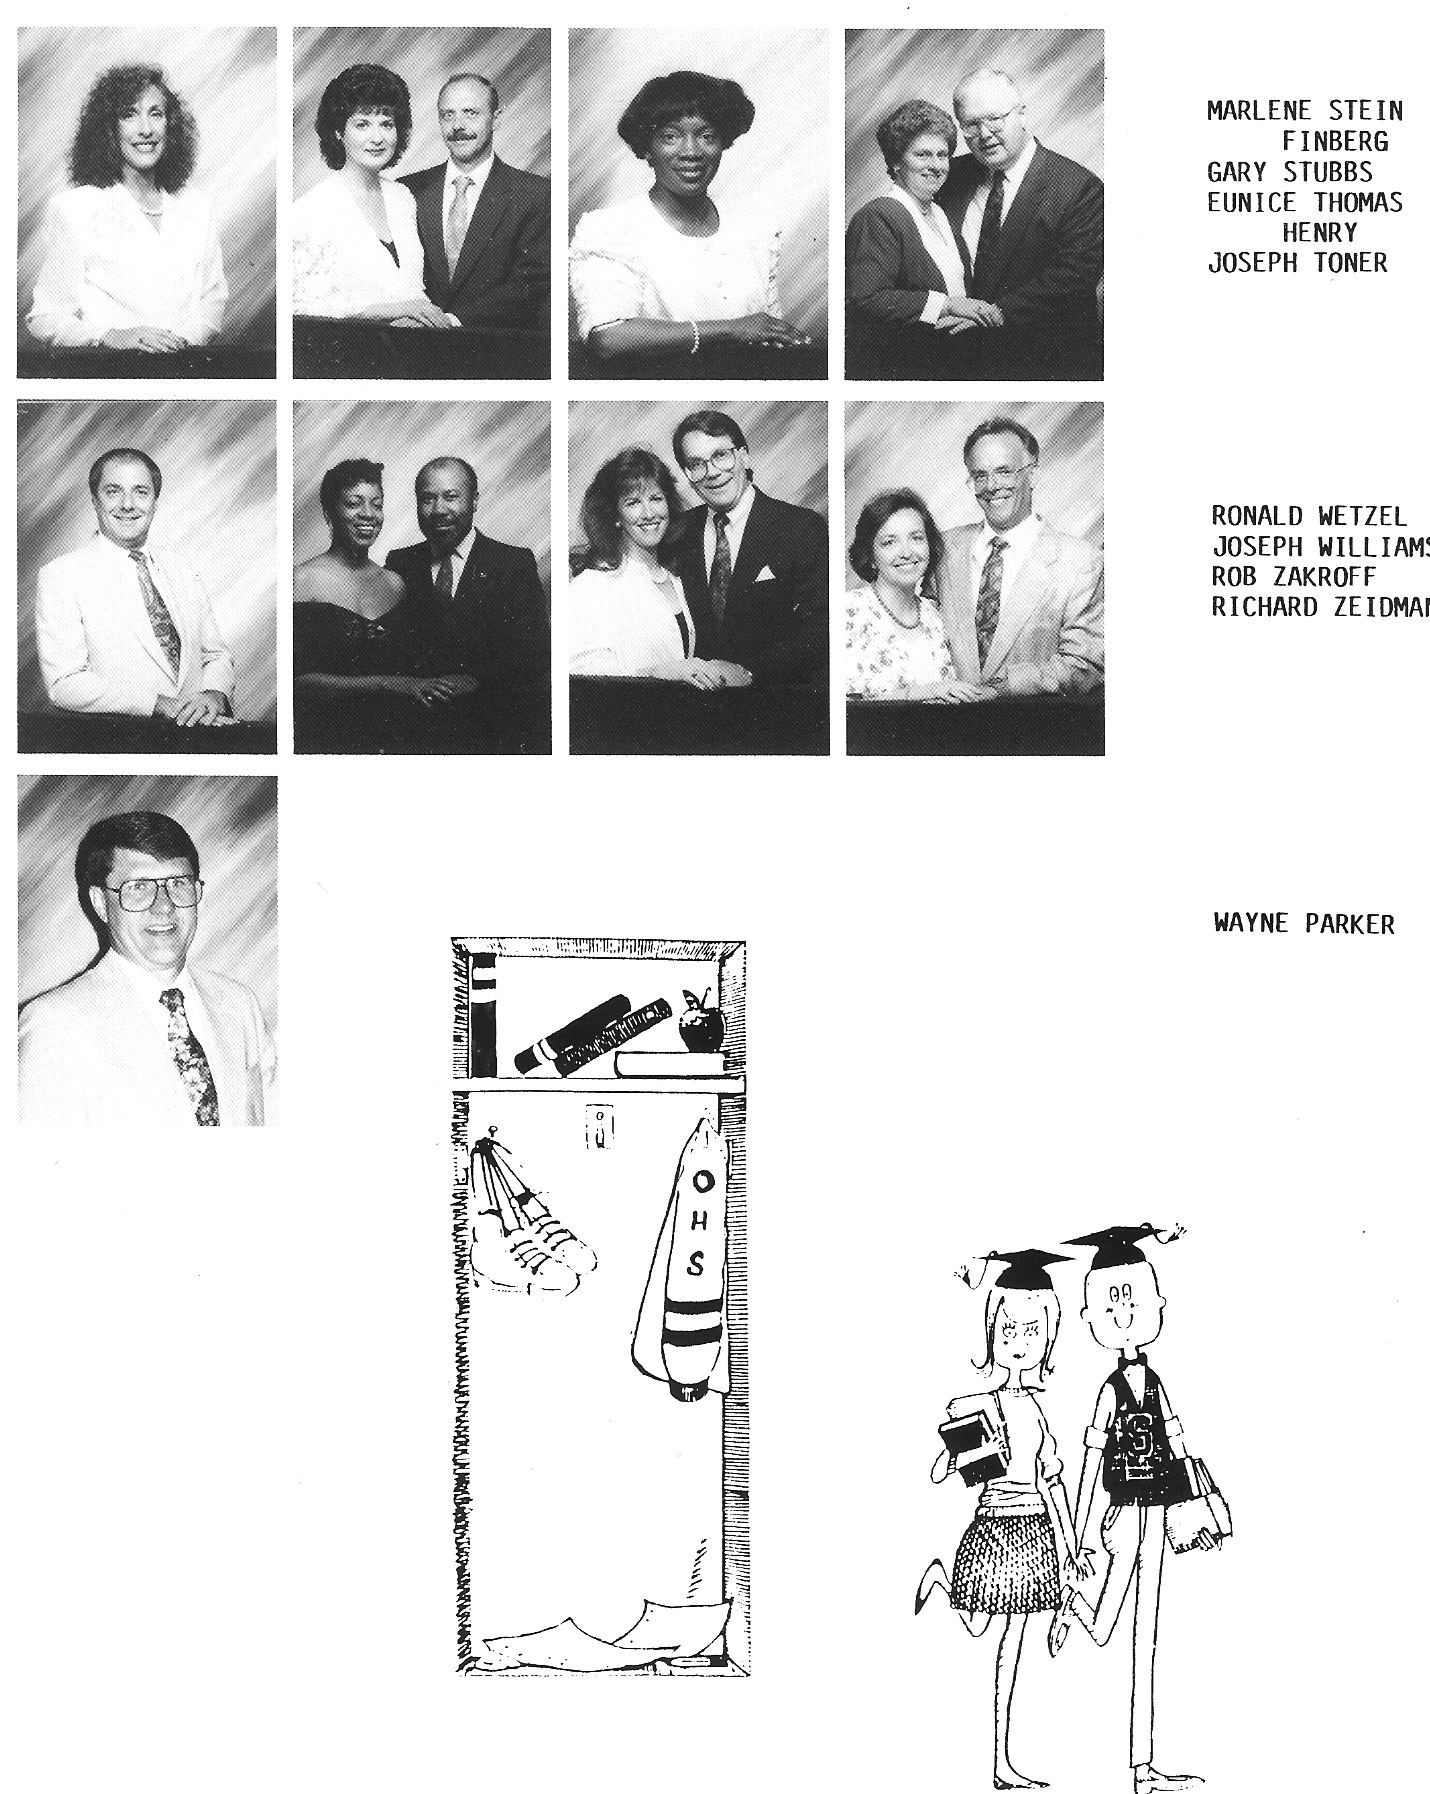 Our 25th reunion-June 22,1991 Warrington Country Club
click on photo enlarge